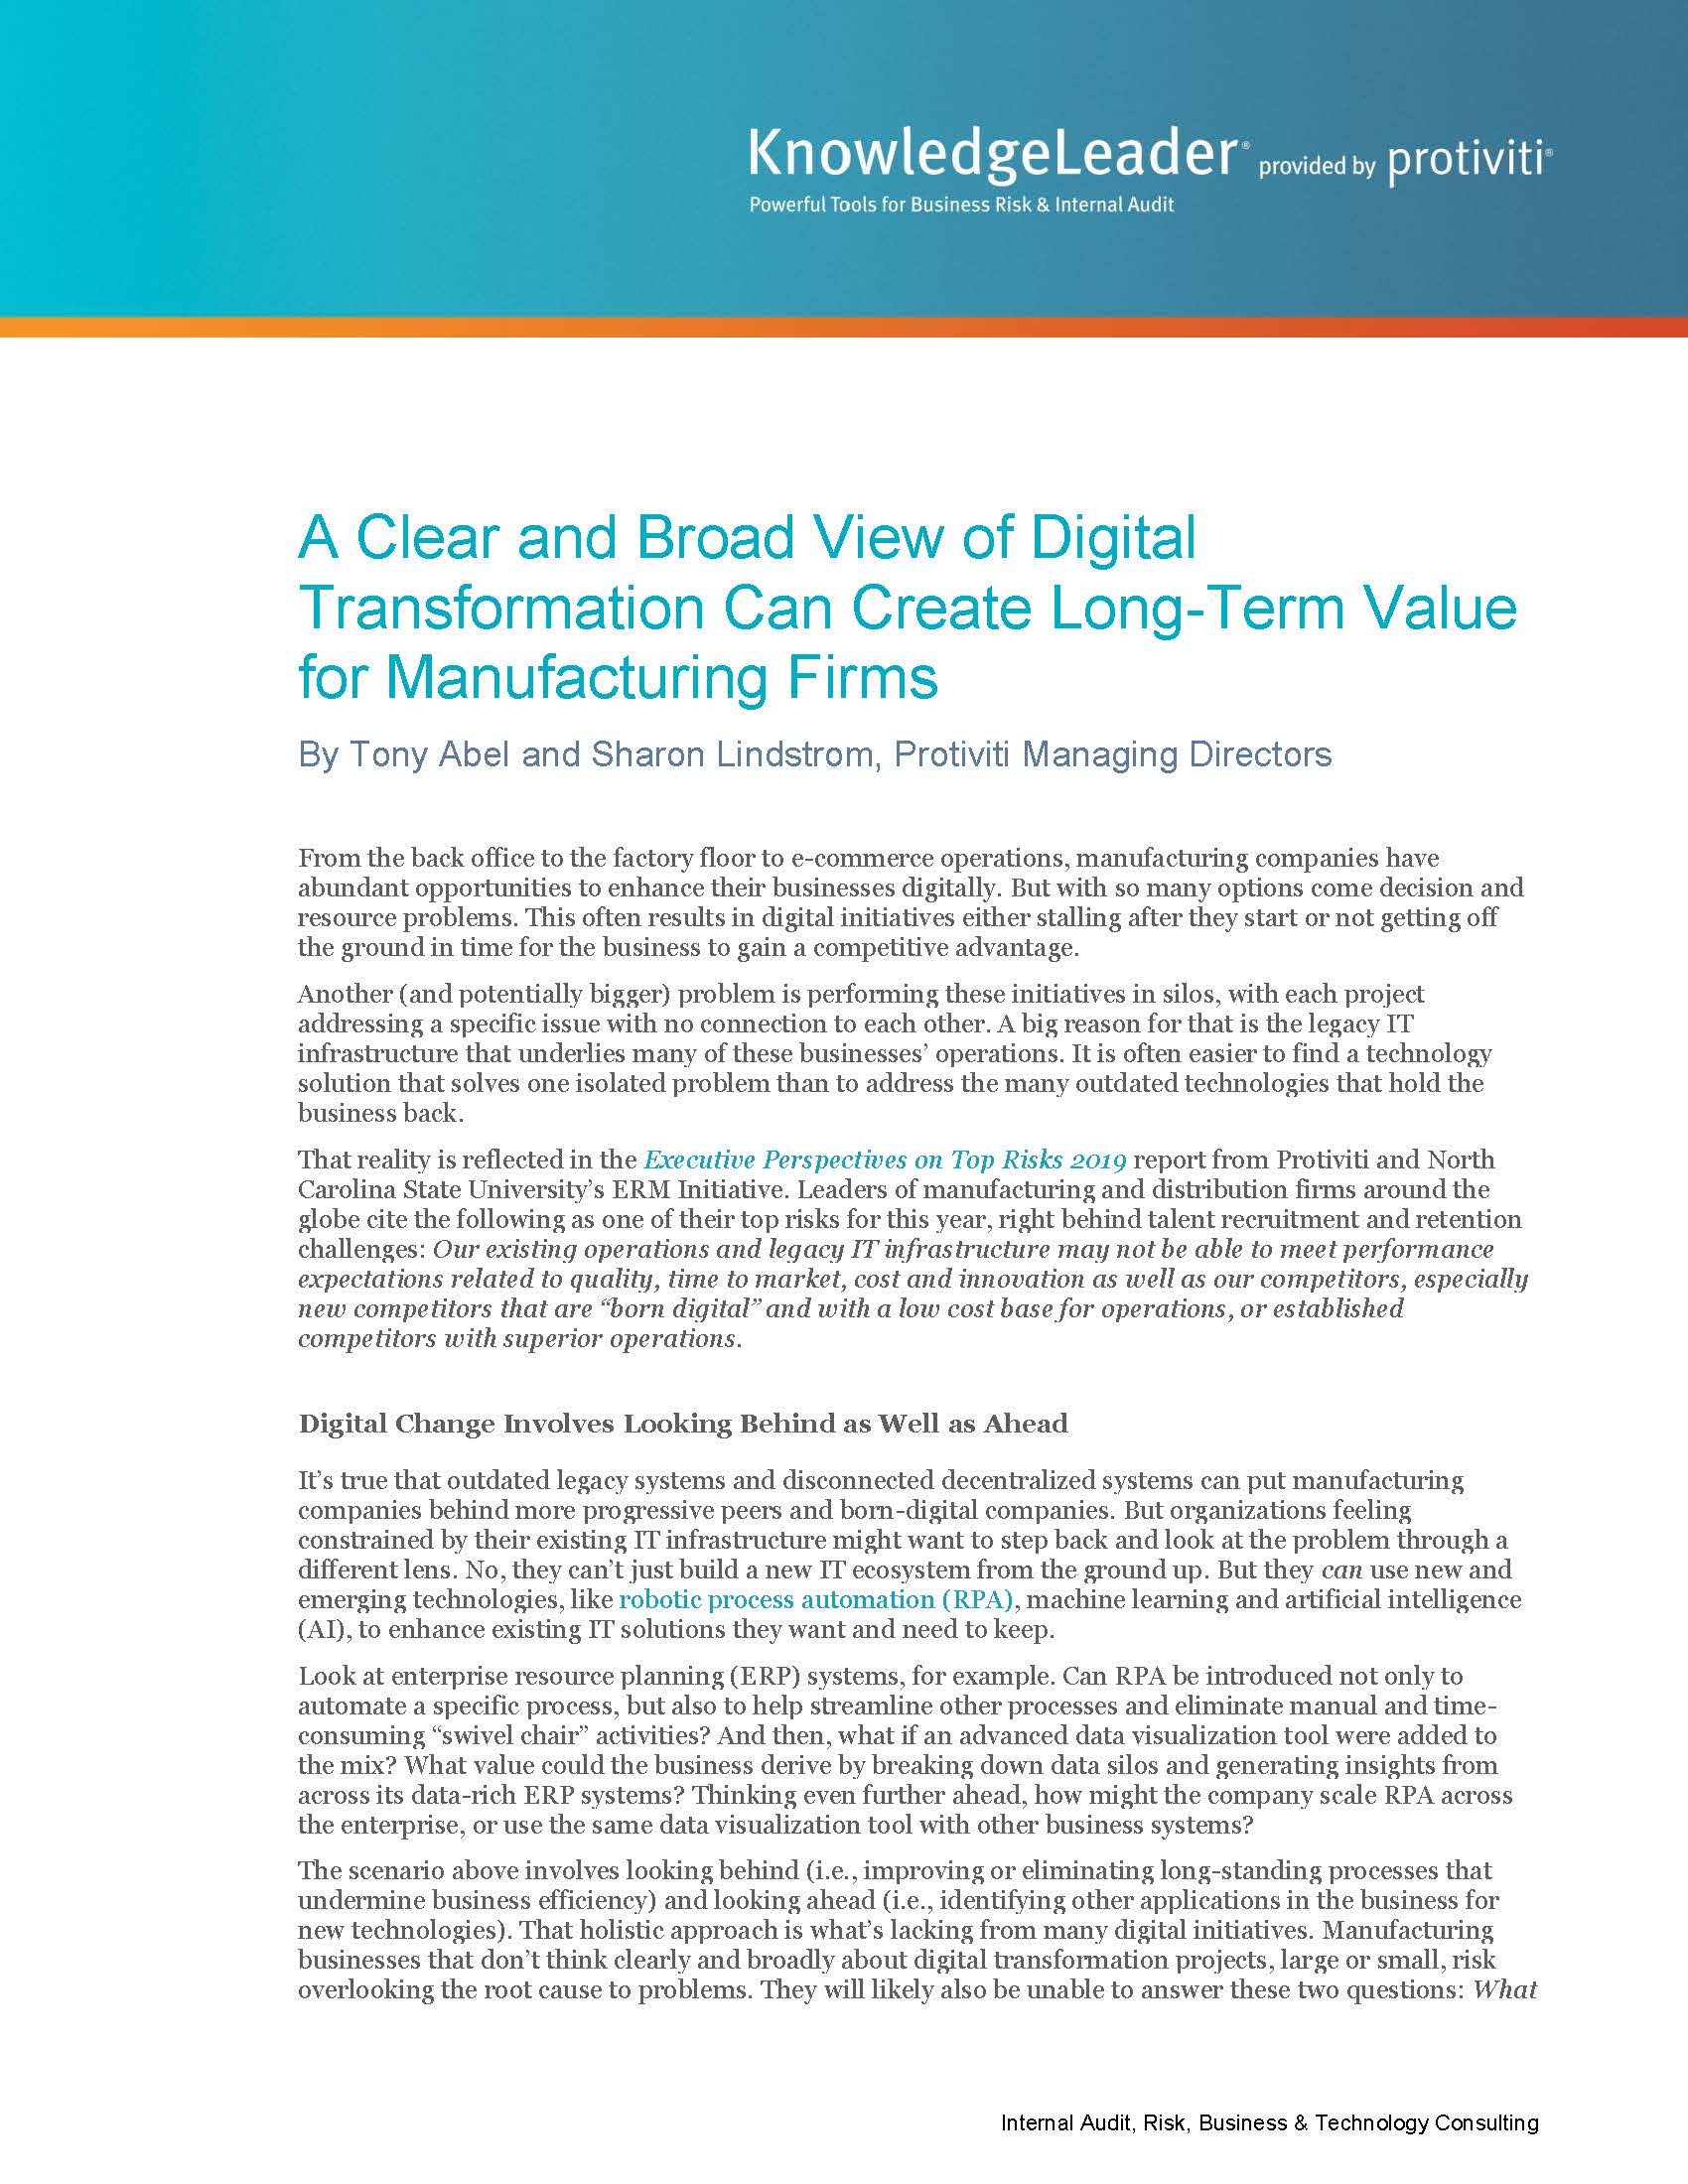 Screenshot of the first page of A Clear and Broad View of Digital Transformation Can Create Long-Term Value for Manufacturing Firms